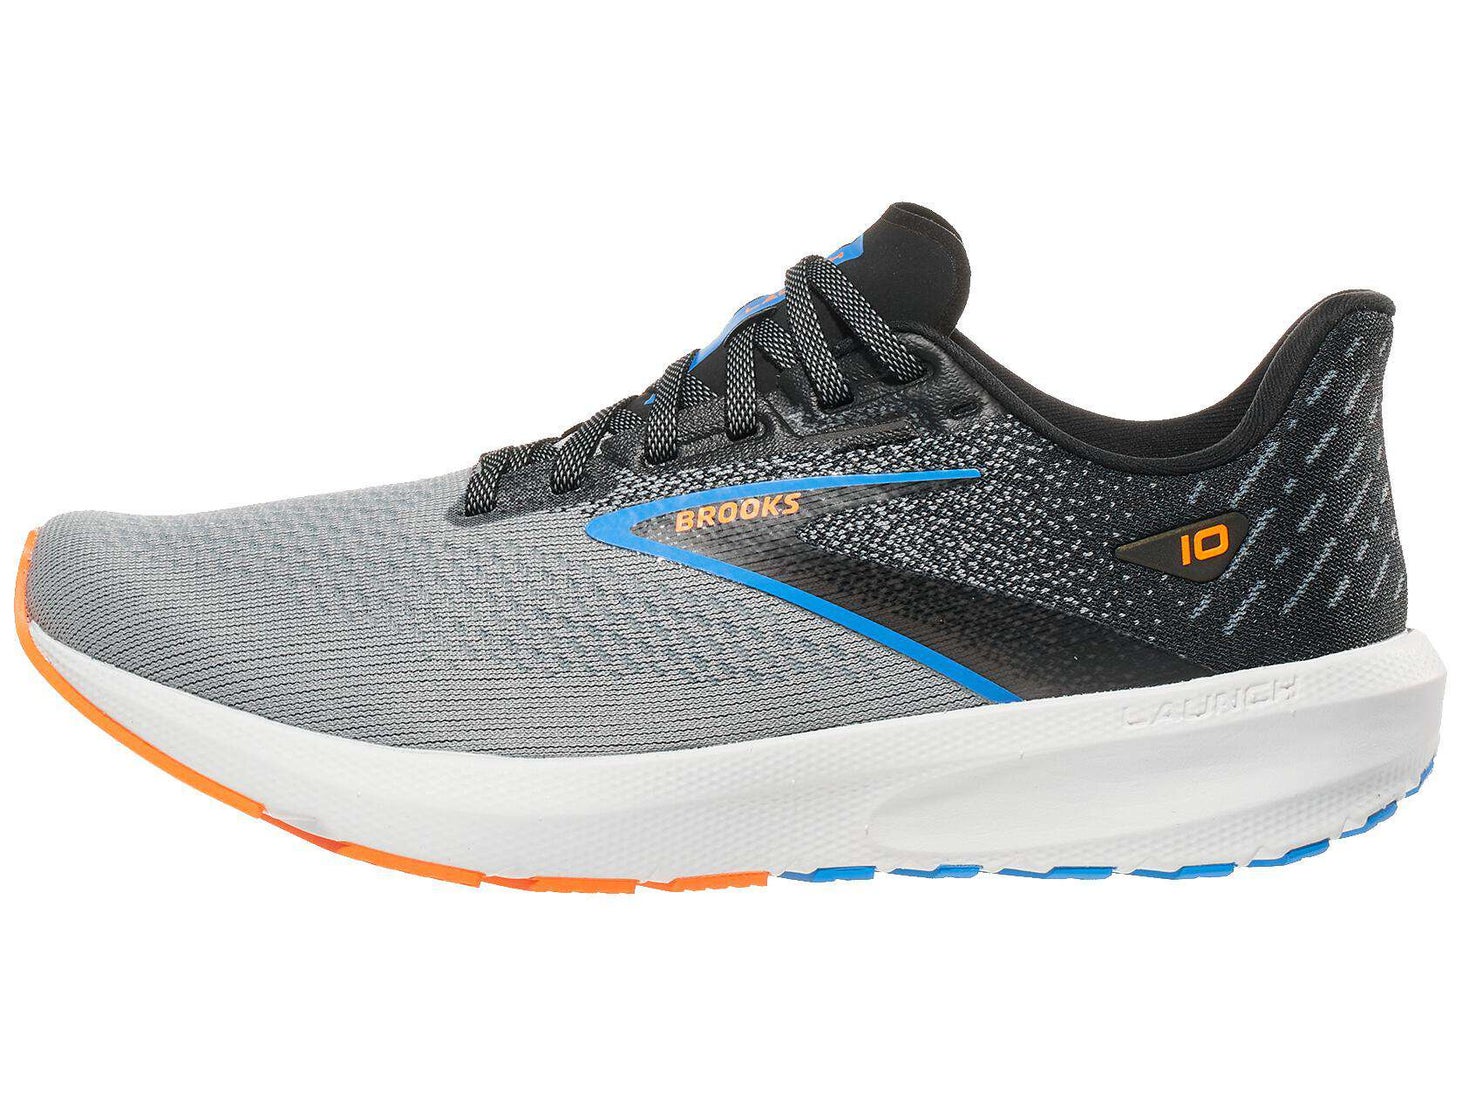 Brooks Launch 10 running shoe. Upper is grey and black. Midsole is white.